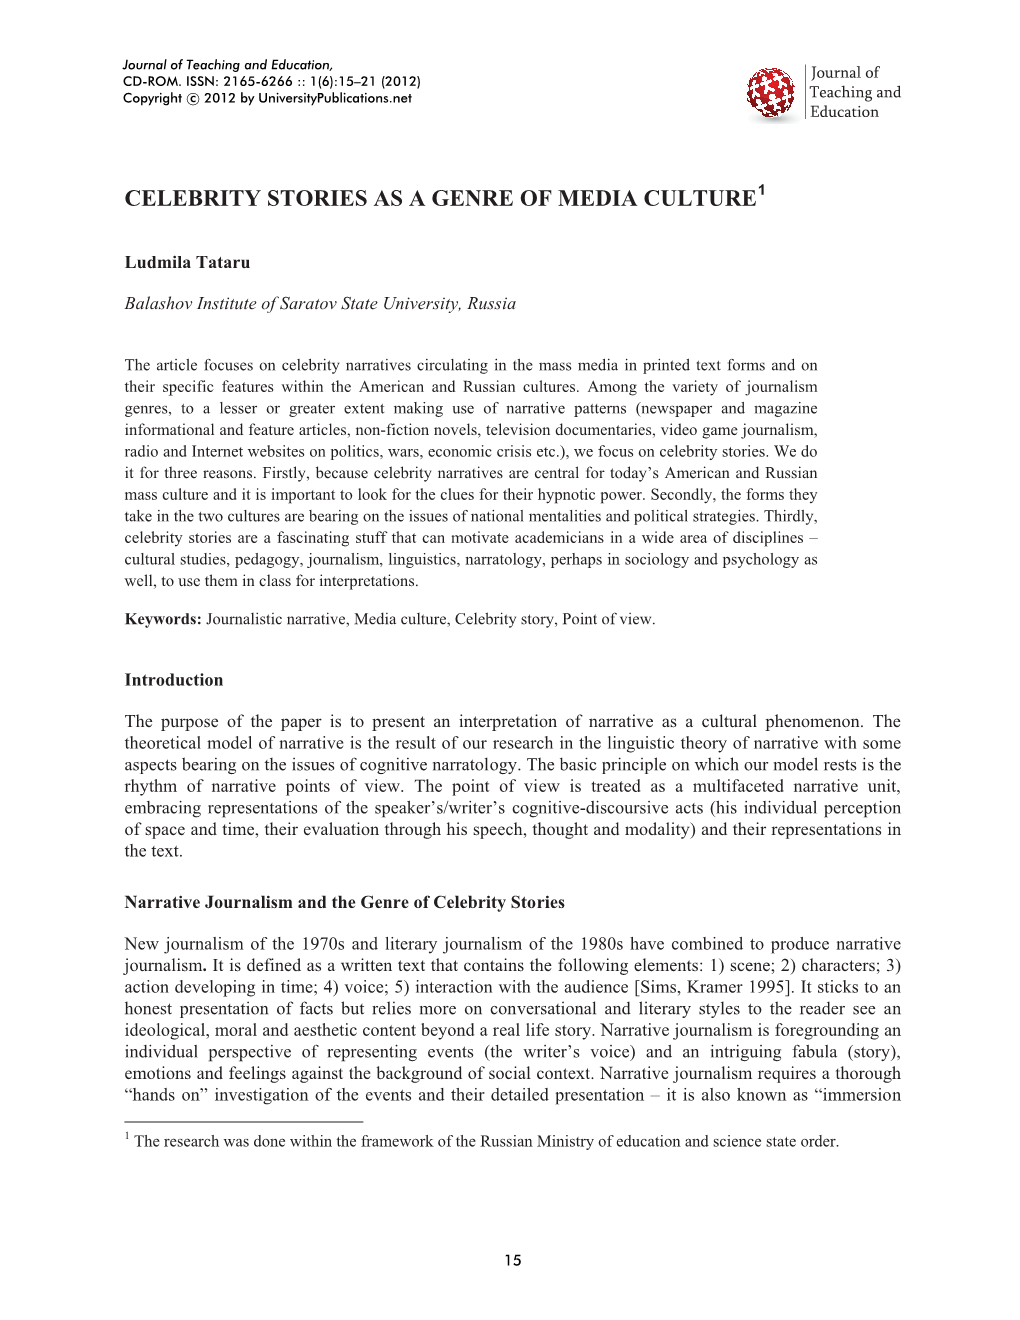 Celebrity Stories As a Genre of Media Culture 1